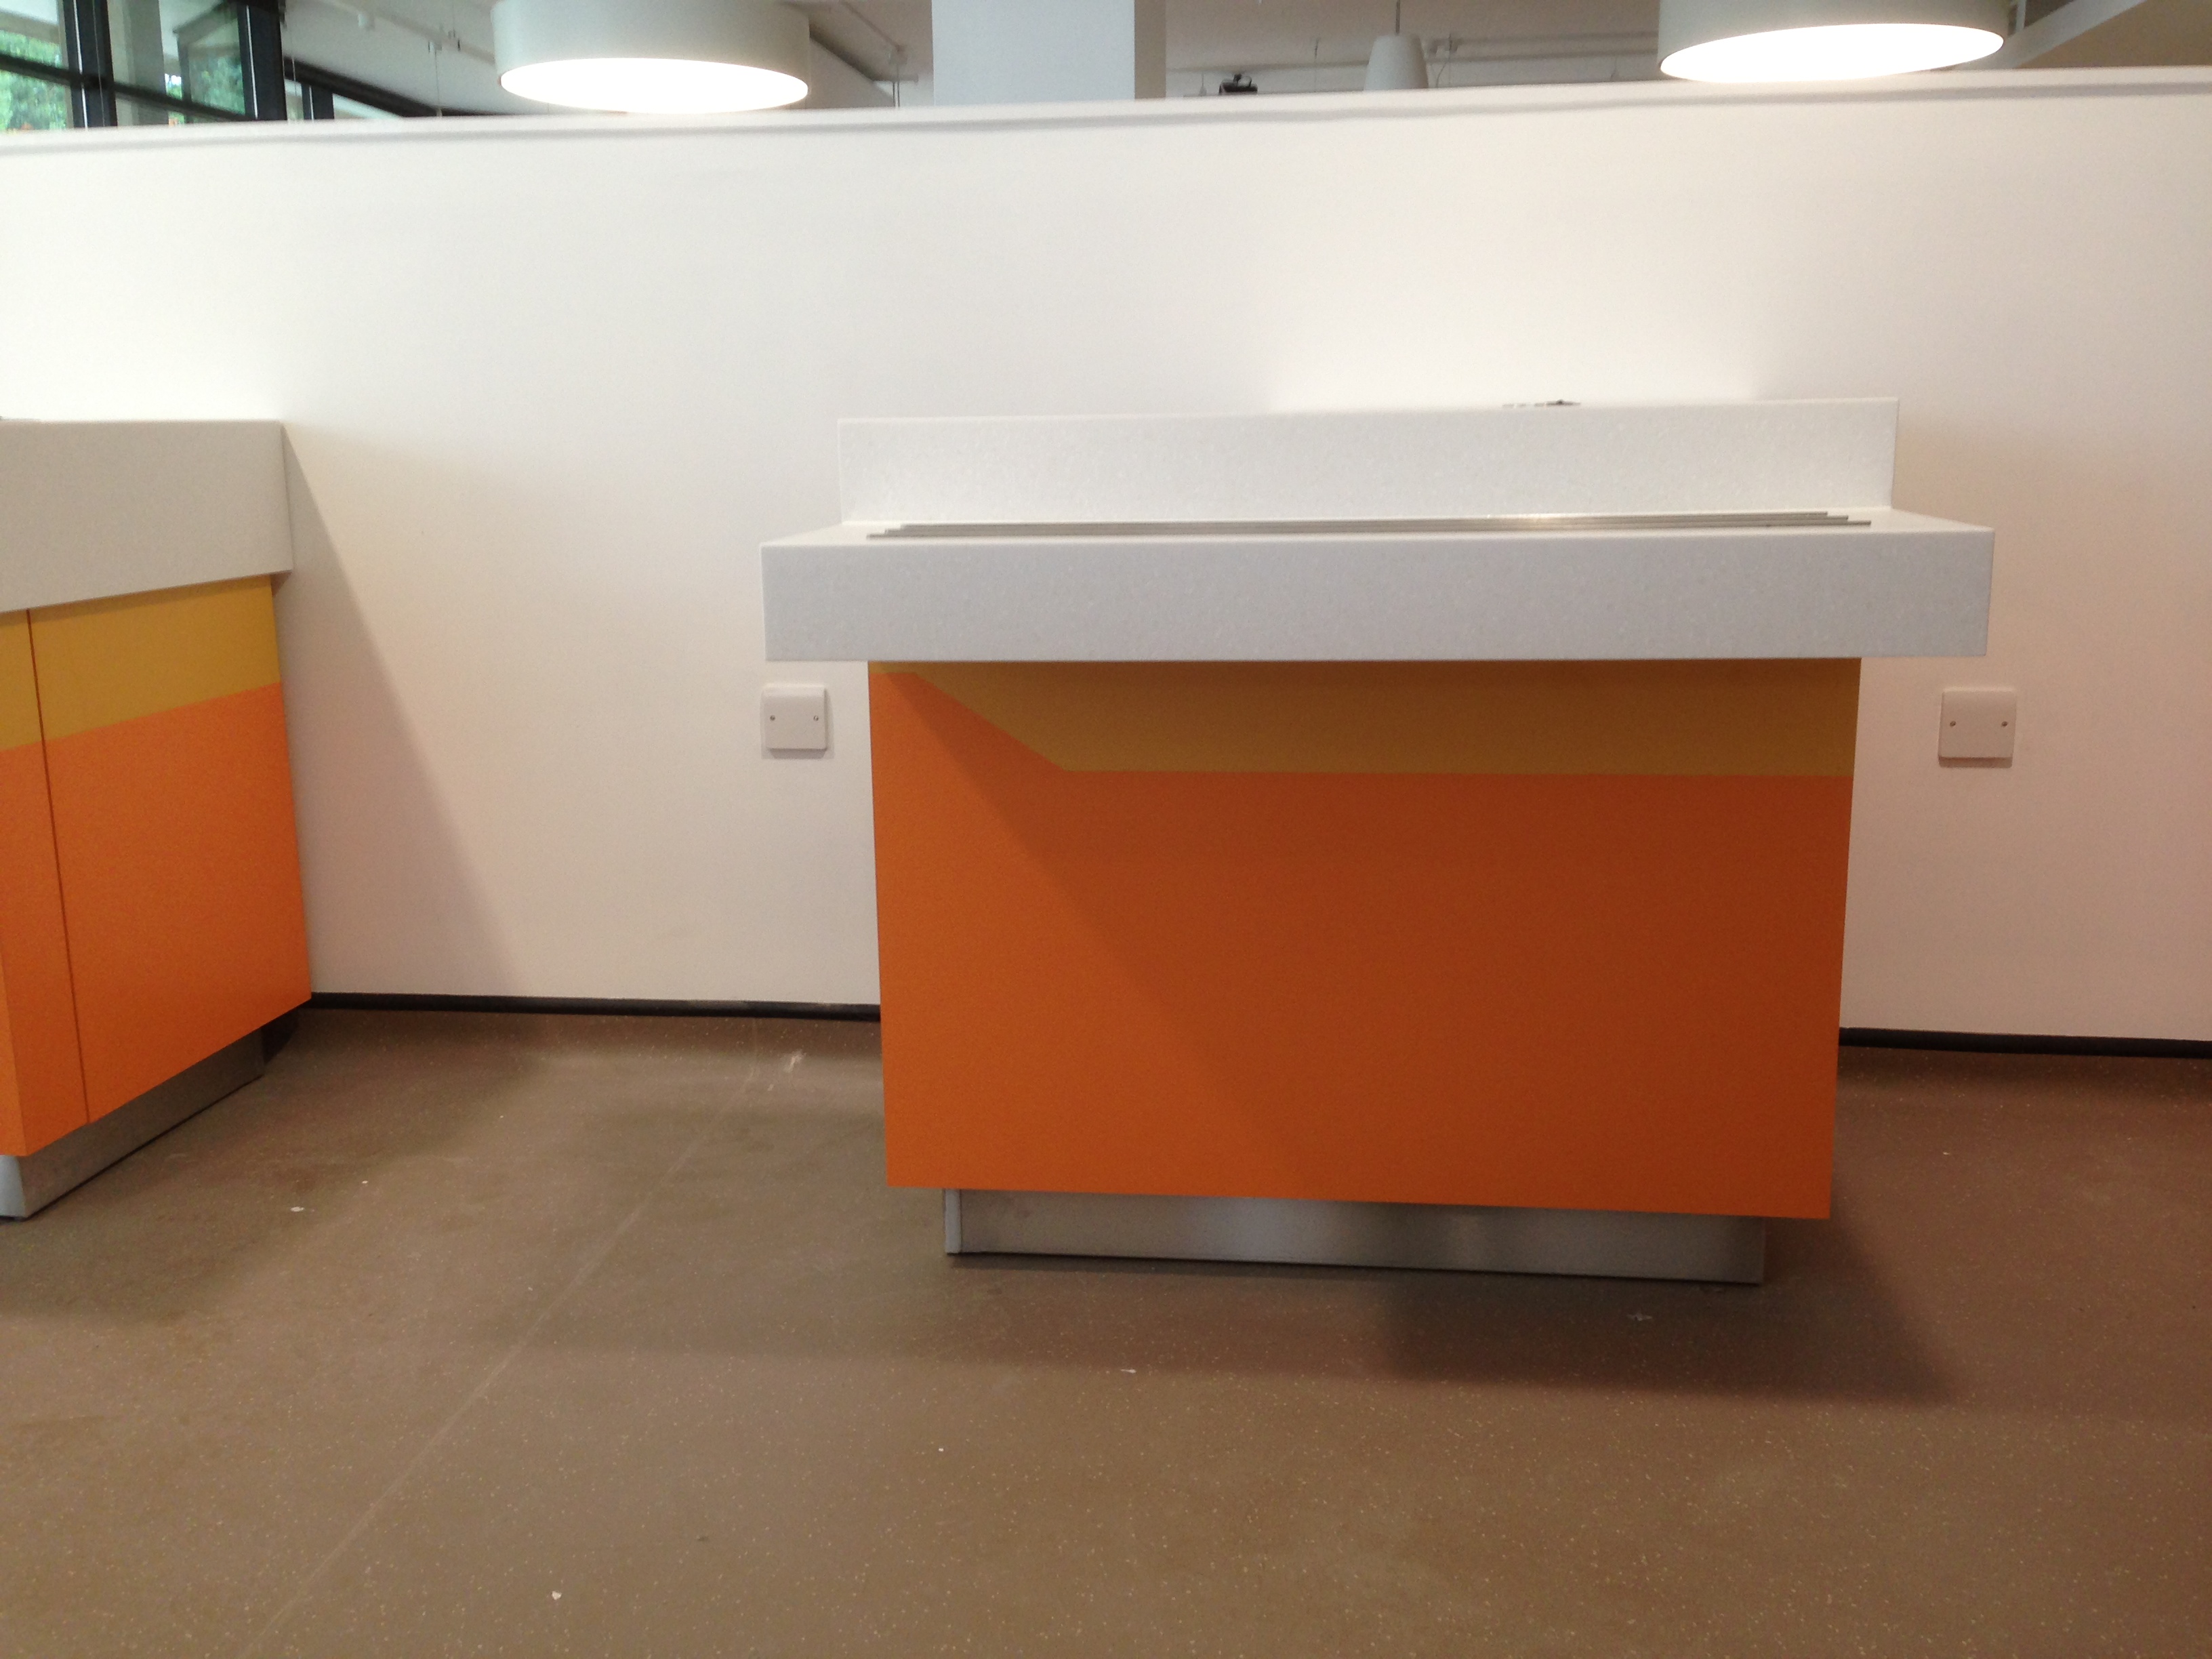 University -  Birmingham White solid surface worktops with stainless steel tray runners and two tone laminated fascia